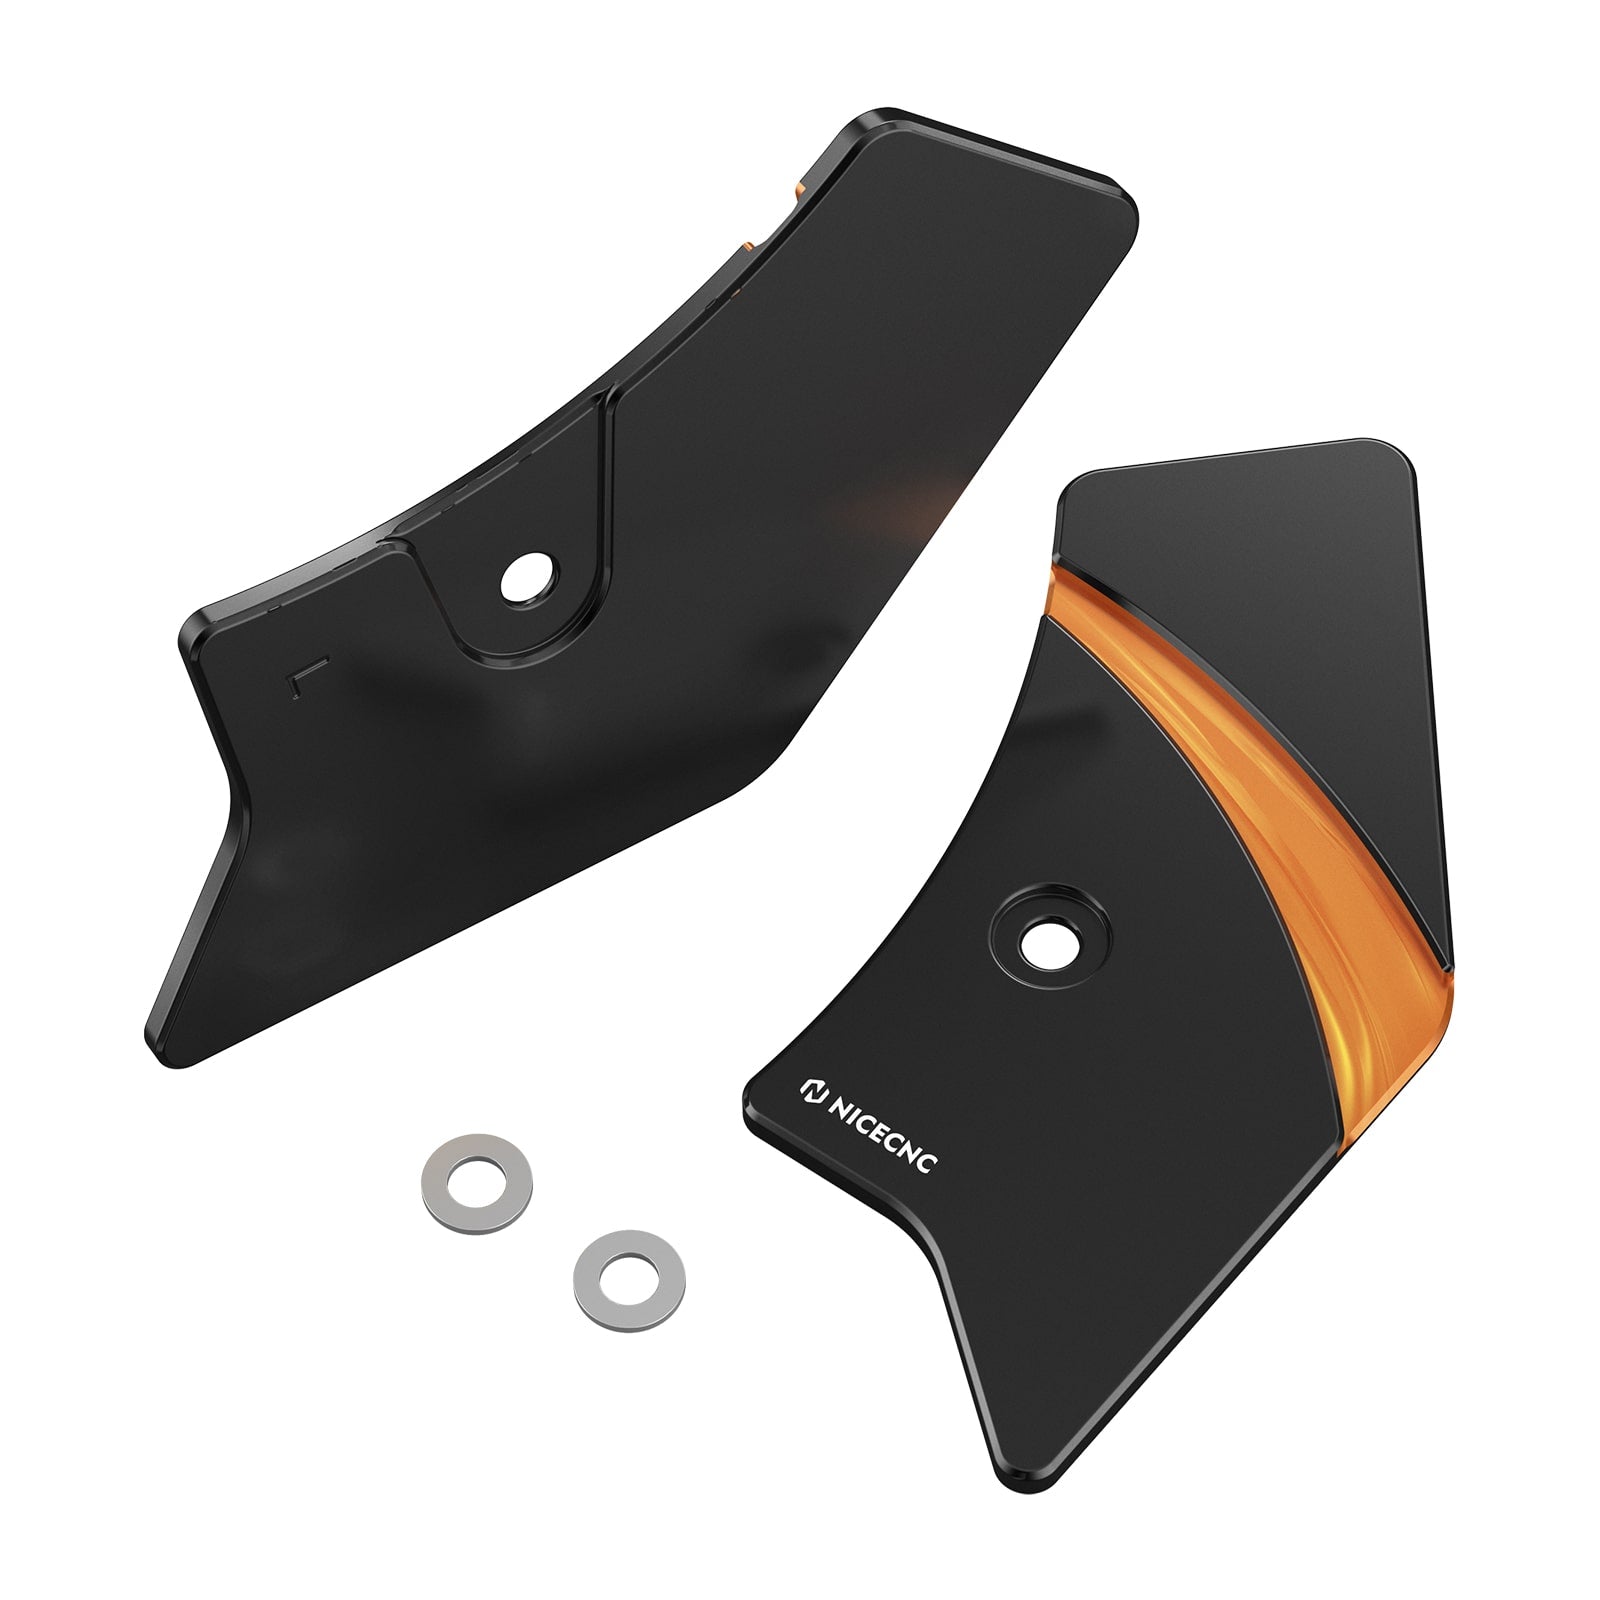 Left & Right Frame Steering Neck Covers Protectors For Harley Davidson Road King Road Glide Ultra Limited